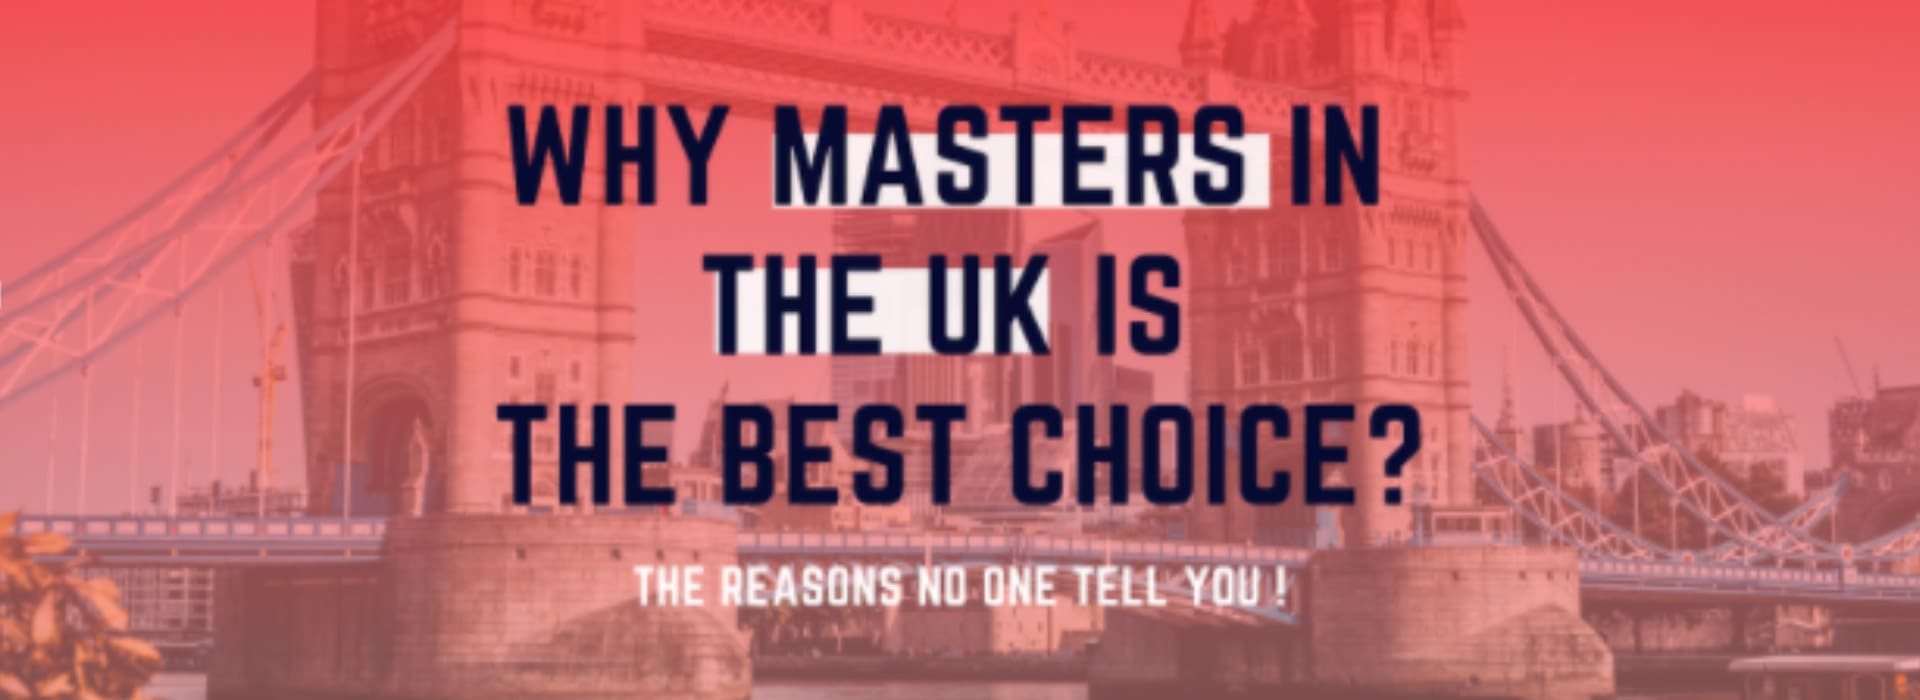 Why Masters in the UK is the best choice?